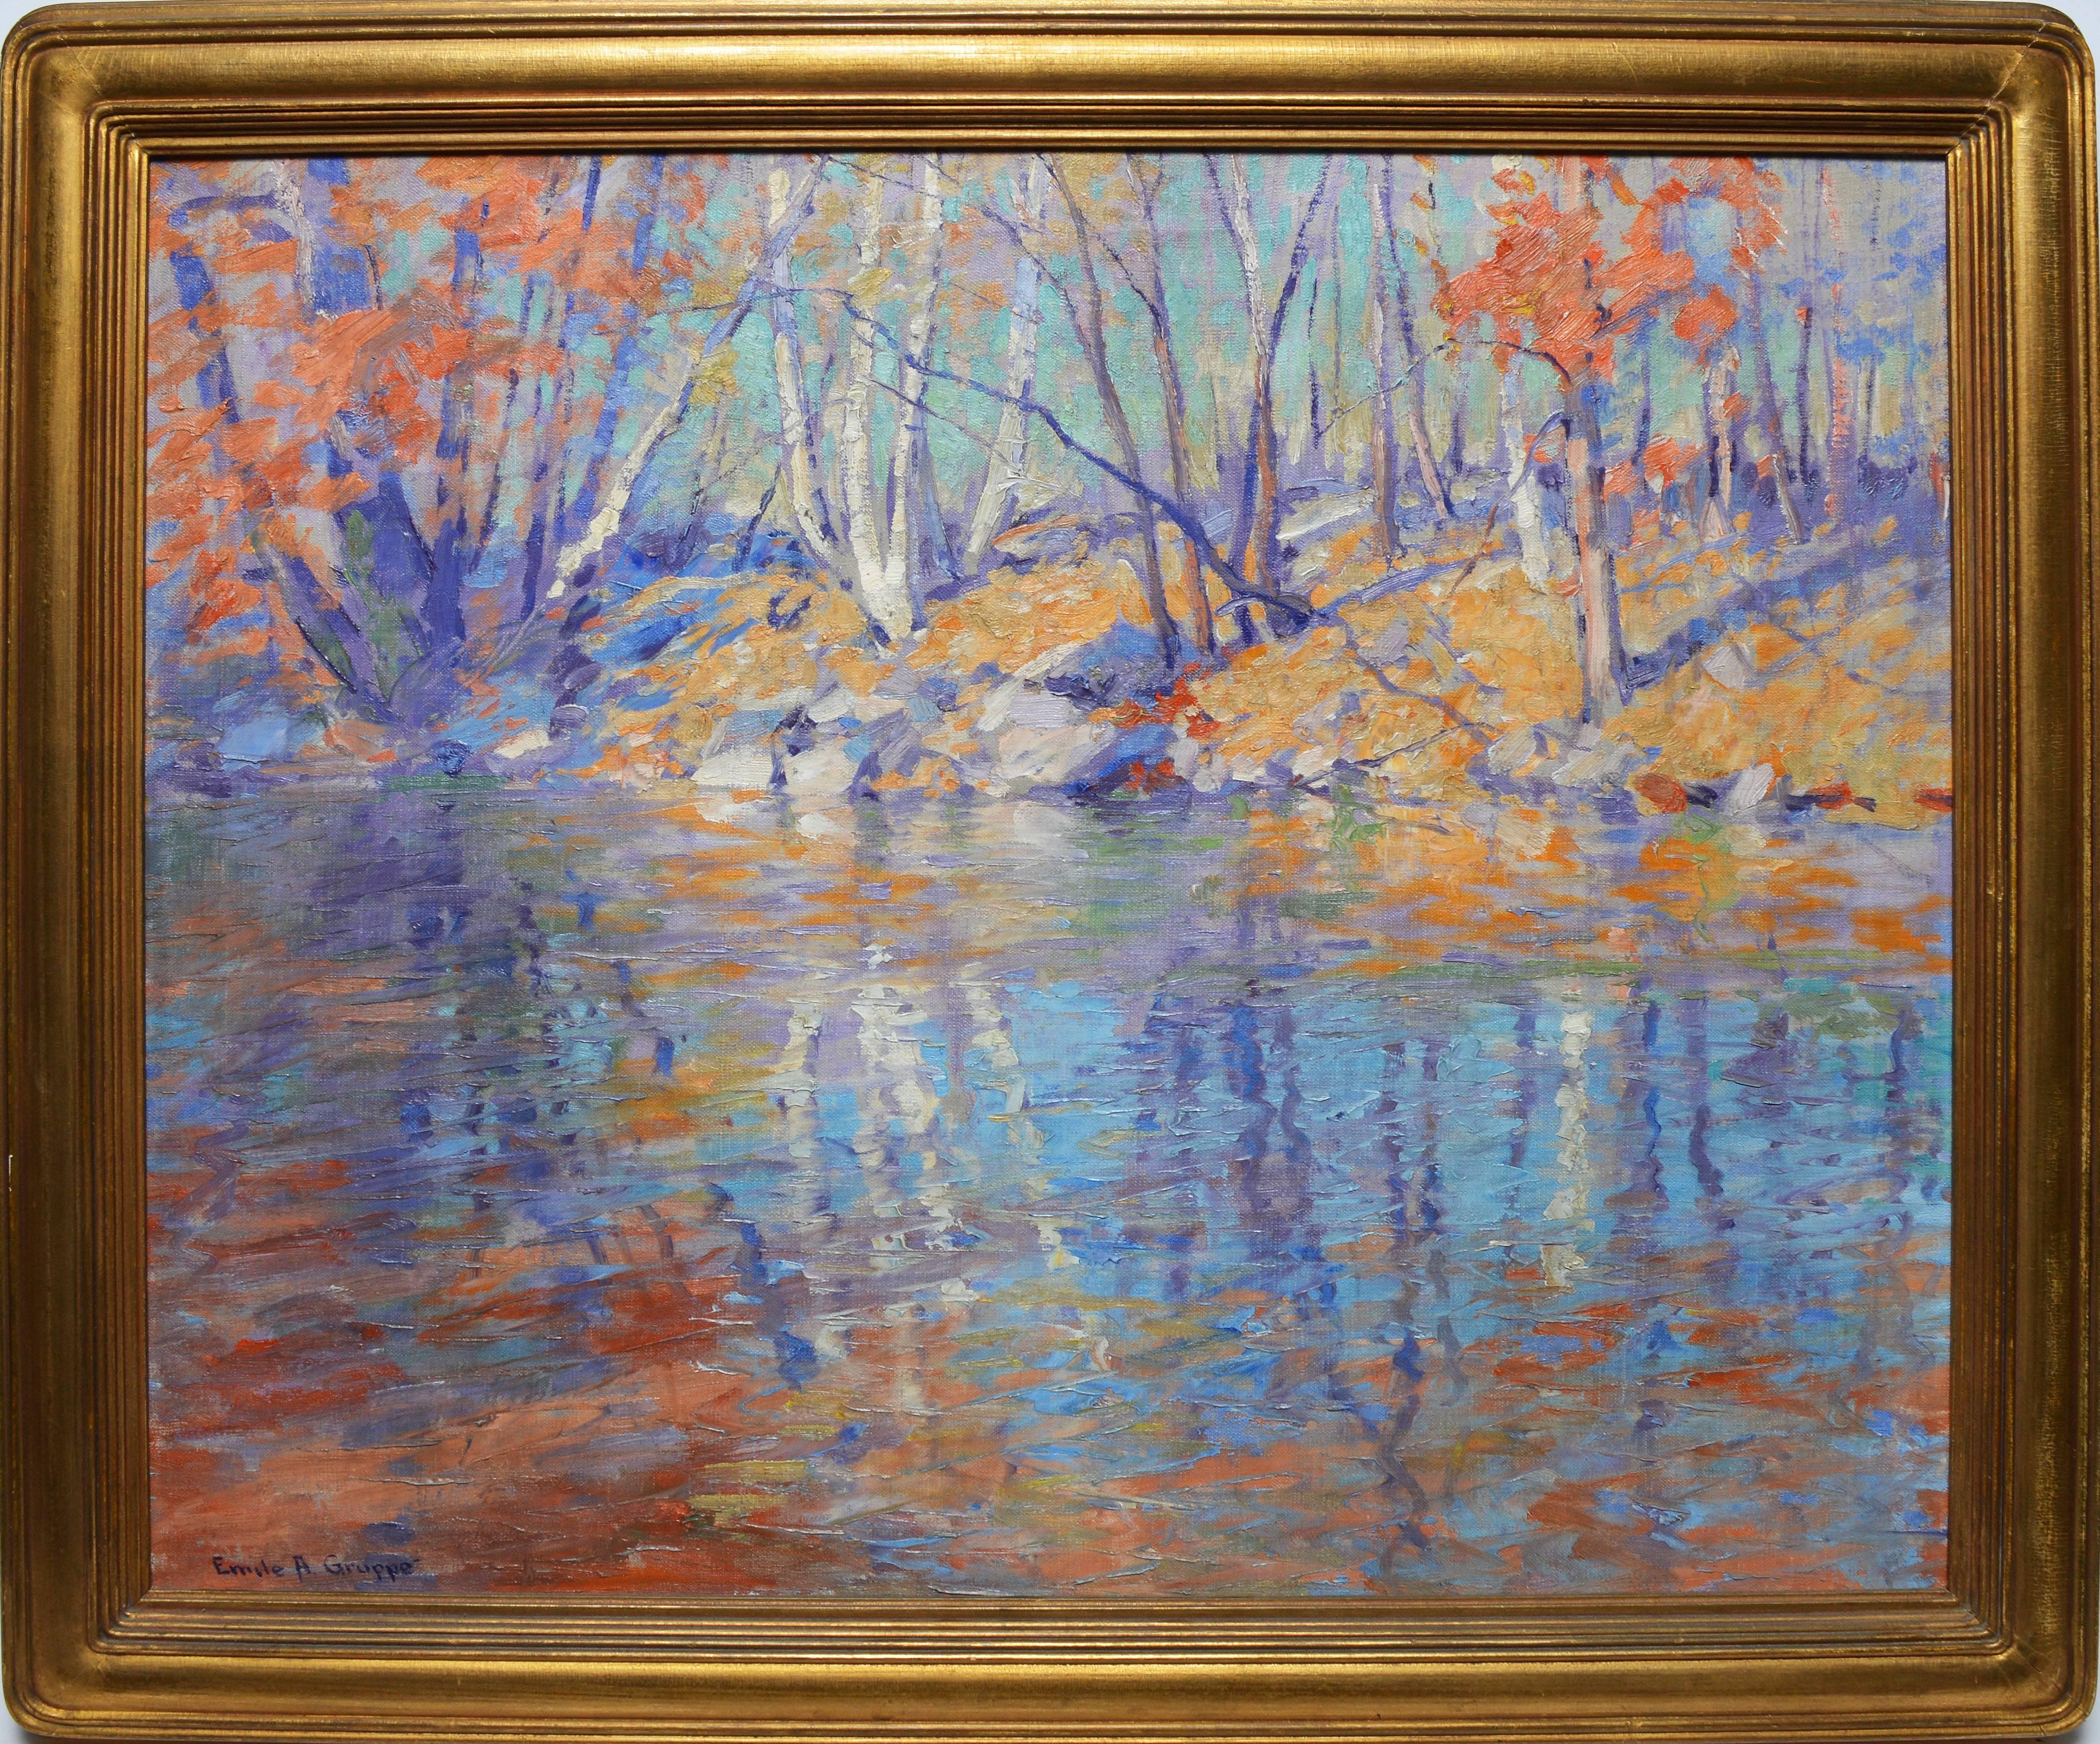 Emile Albert Gruppe Landscape Painting - Fall Reflections